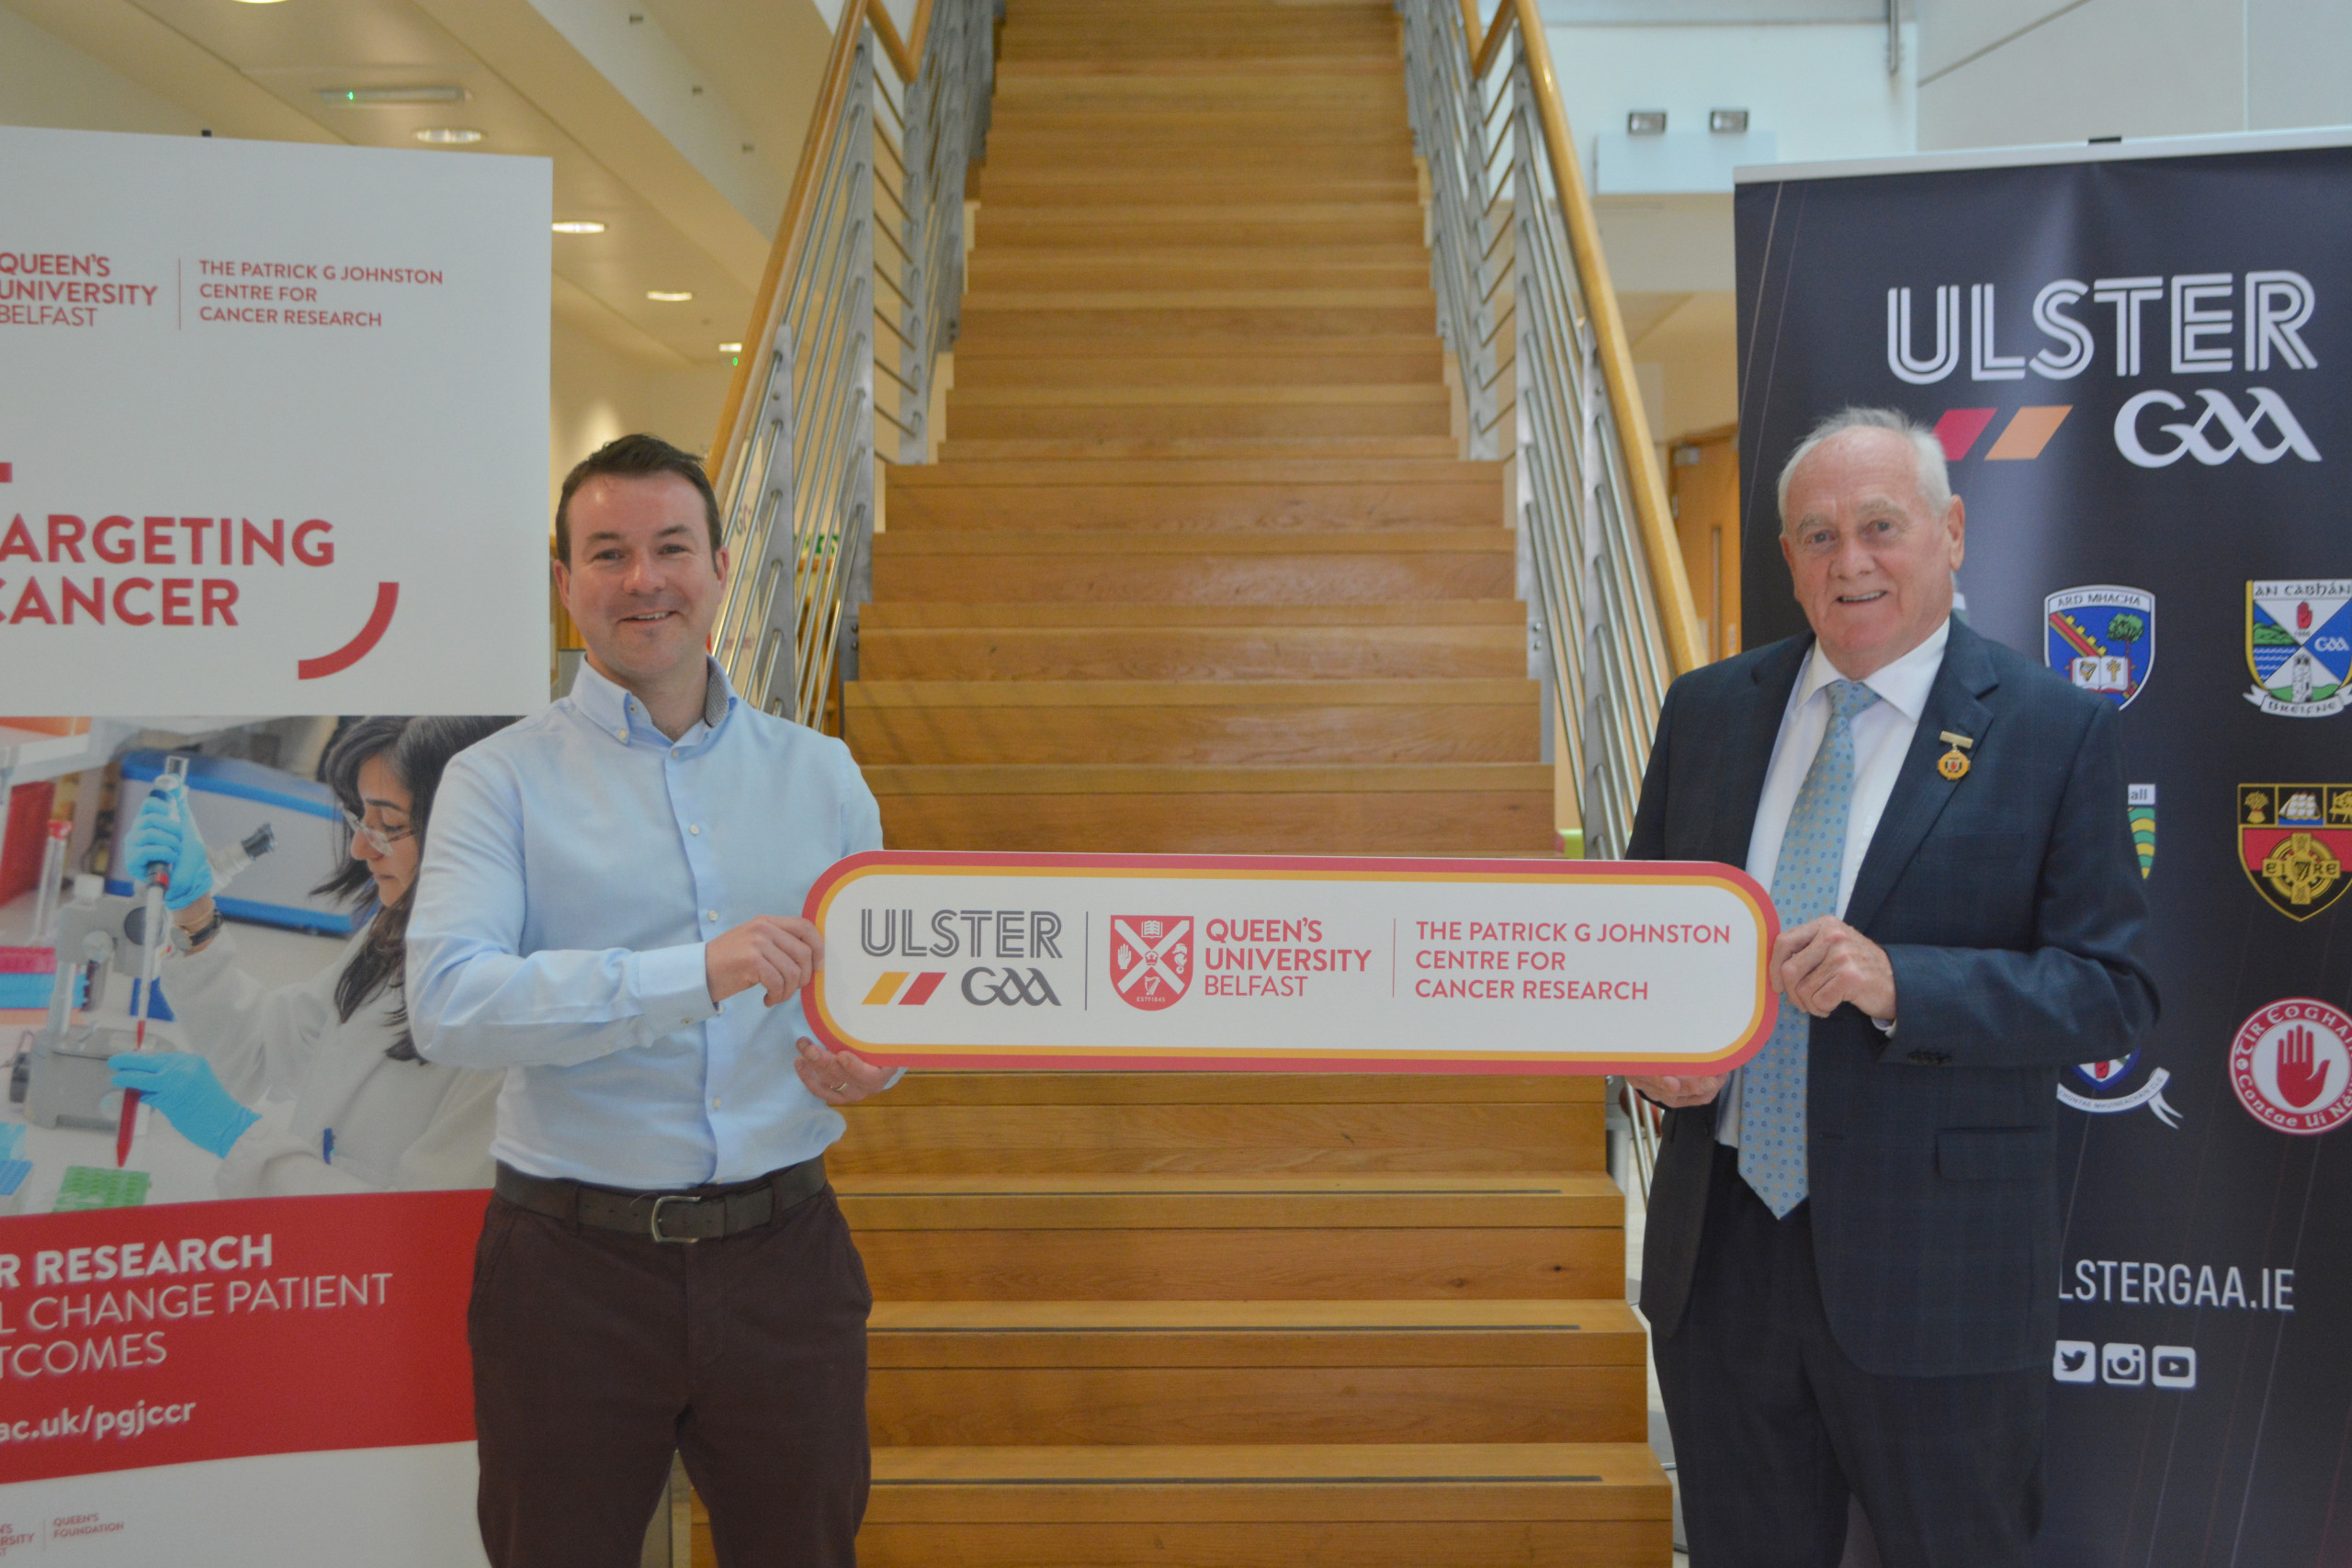 Ulster GAA supporting Prostate Cancer Research